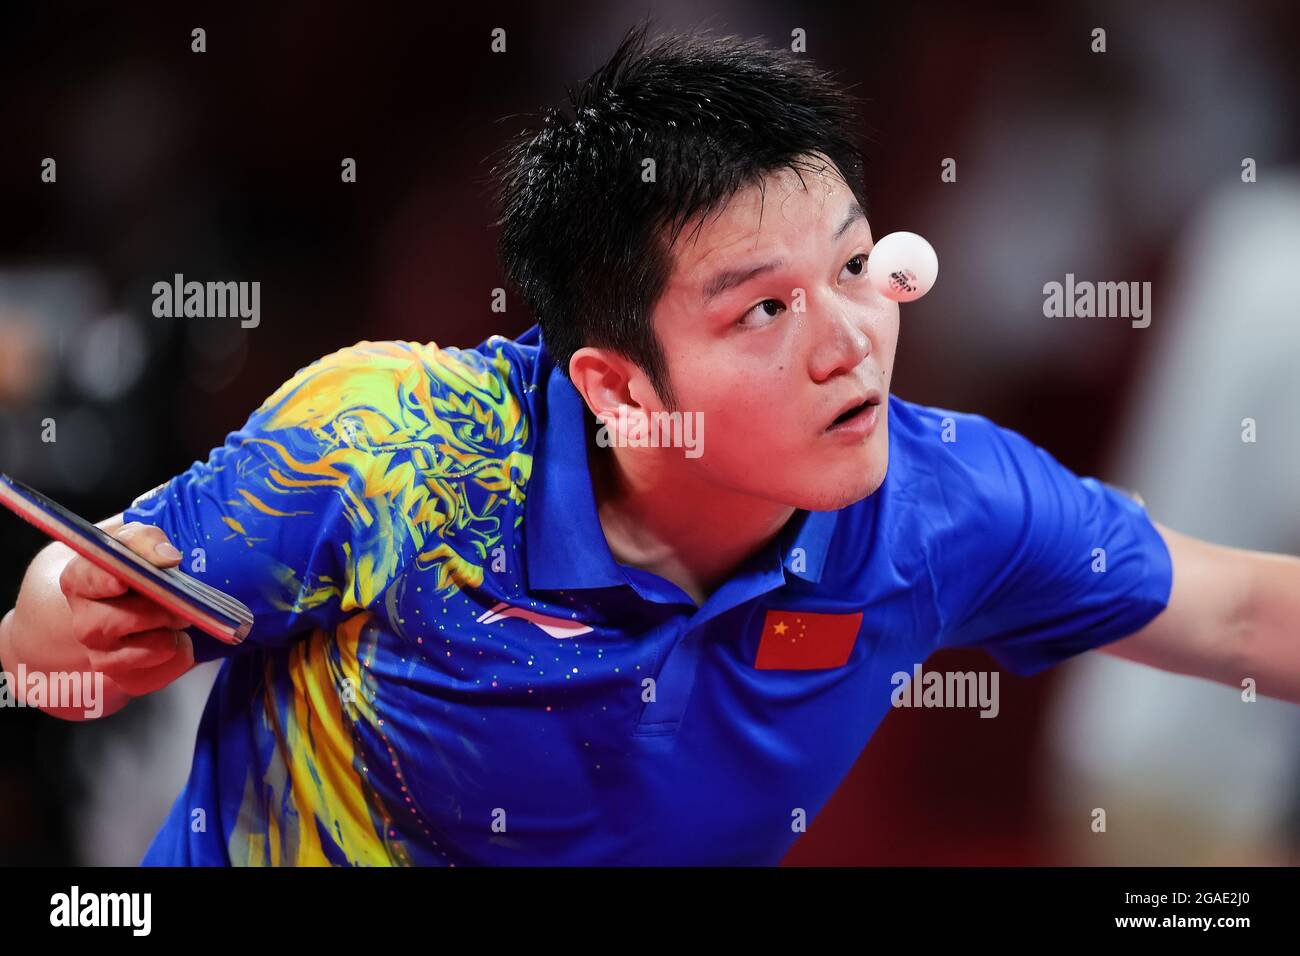 Tokyo, Japan. 30th July, 2021. Fan Zhendong serves during the Men's Table Tennis Singles Gold Medal Match between Fan Zhendong of China and Ma Long of China on Day 7 of the Tokyo 2020 Olympic Games. Credit: Pete Dovgan/Speed Media/Alamy Live News Stock Photo